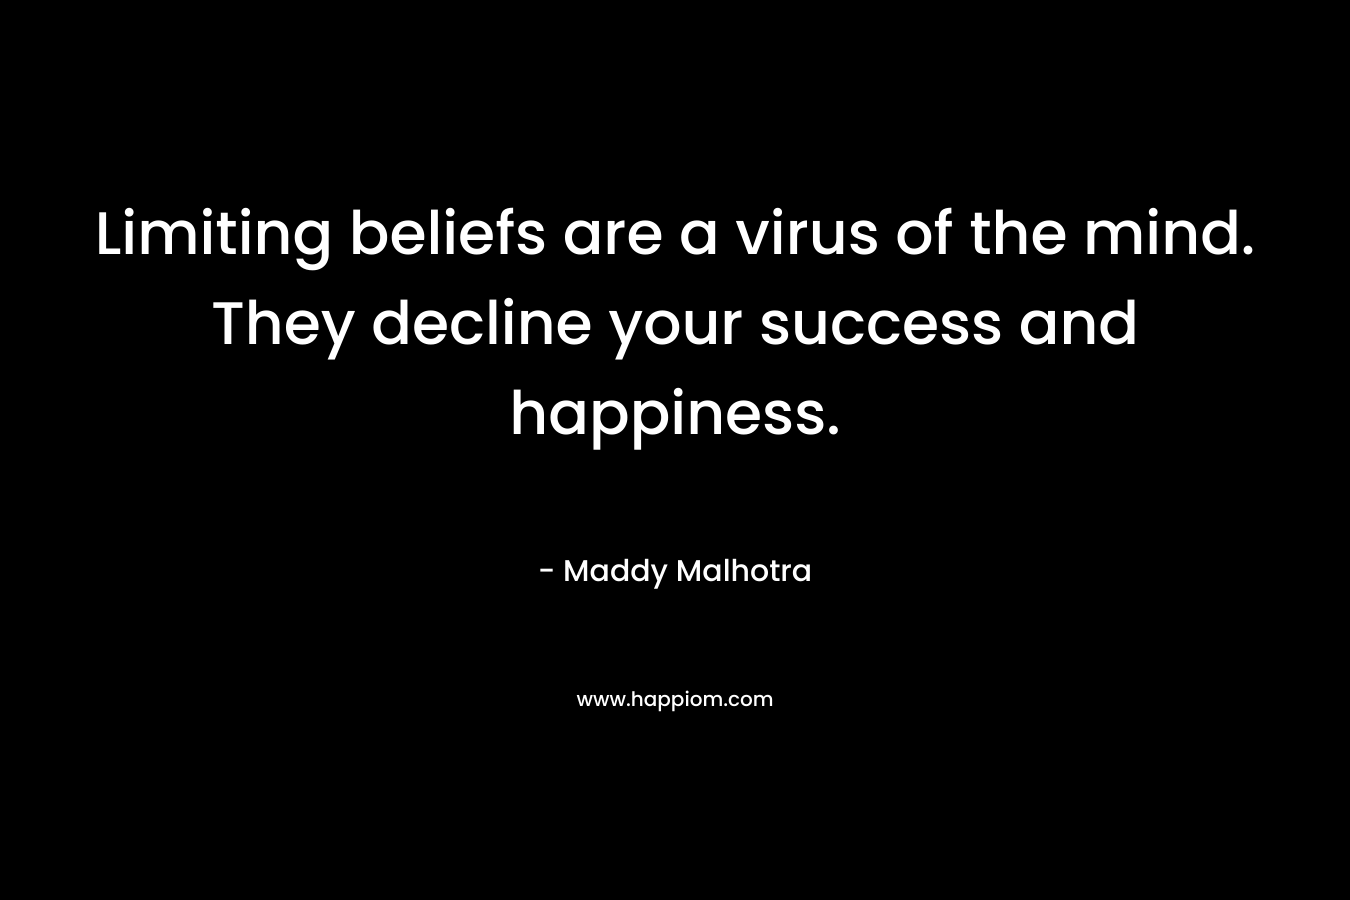 Limiting beliefs are a virus of the mind. They decline your success and happiness.